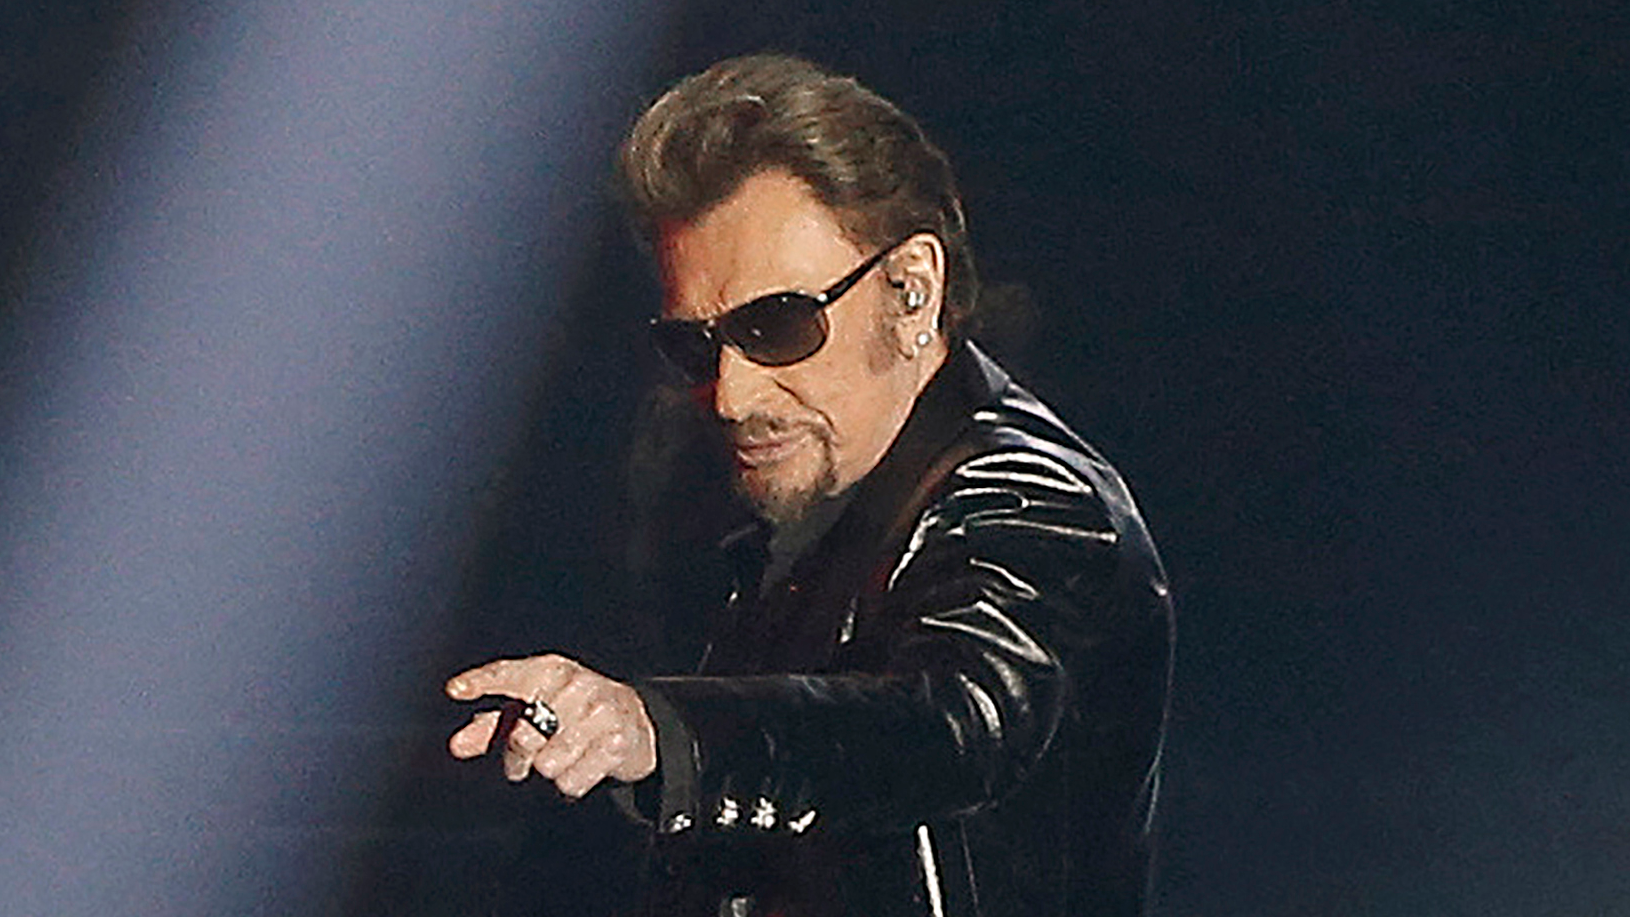 Hallyday, real name Jean-Philippe Leo Smet, is one of the world's best-selling artists. /Francois Guillot/AFP